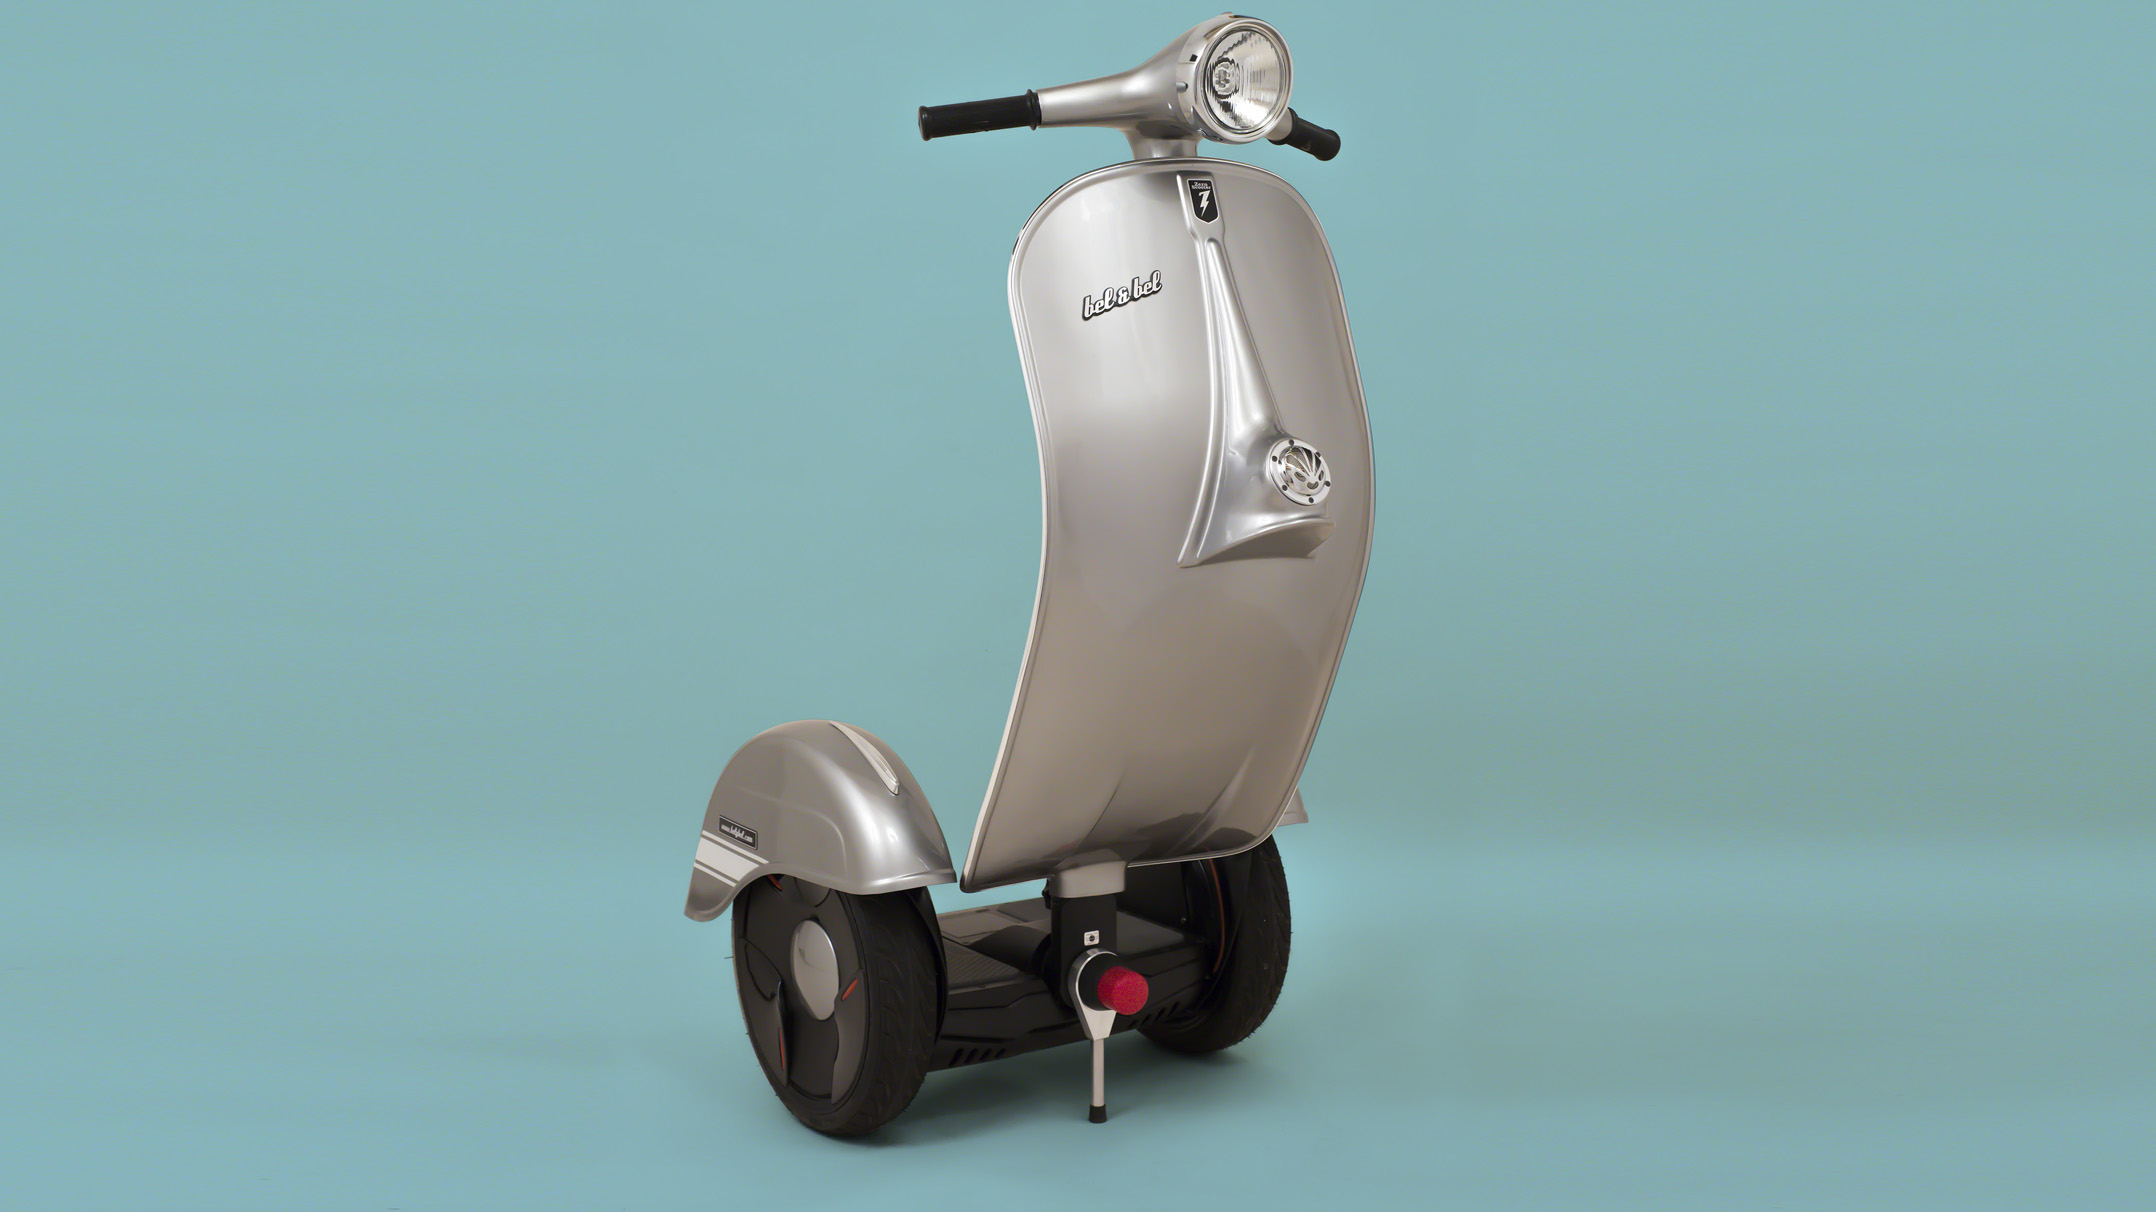 Download Bel & Bel mixes a Segway and Vespa for the "world's first" self-balancing scooter - 9to5Toys